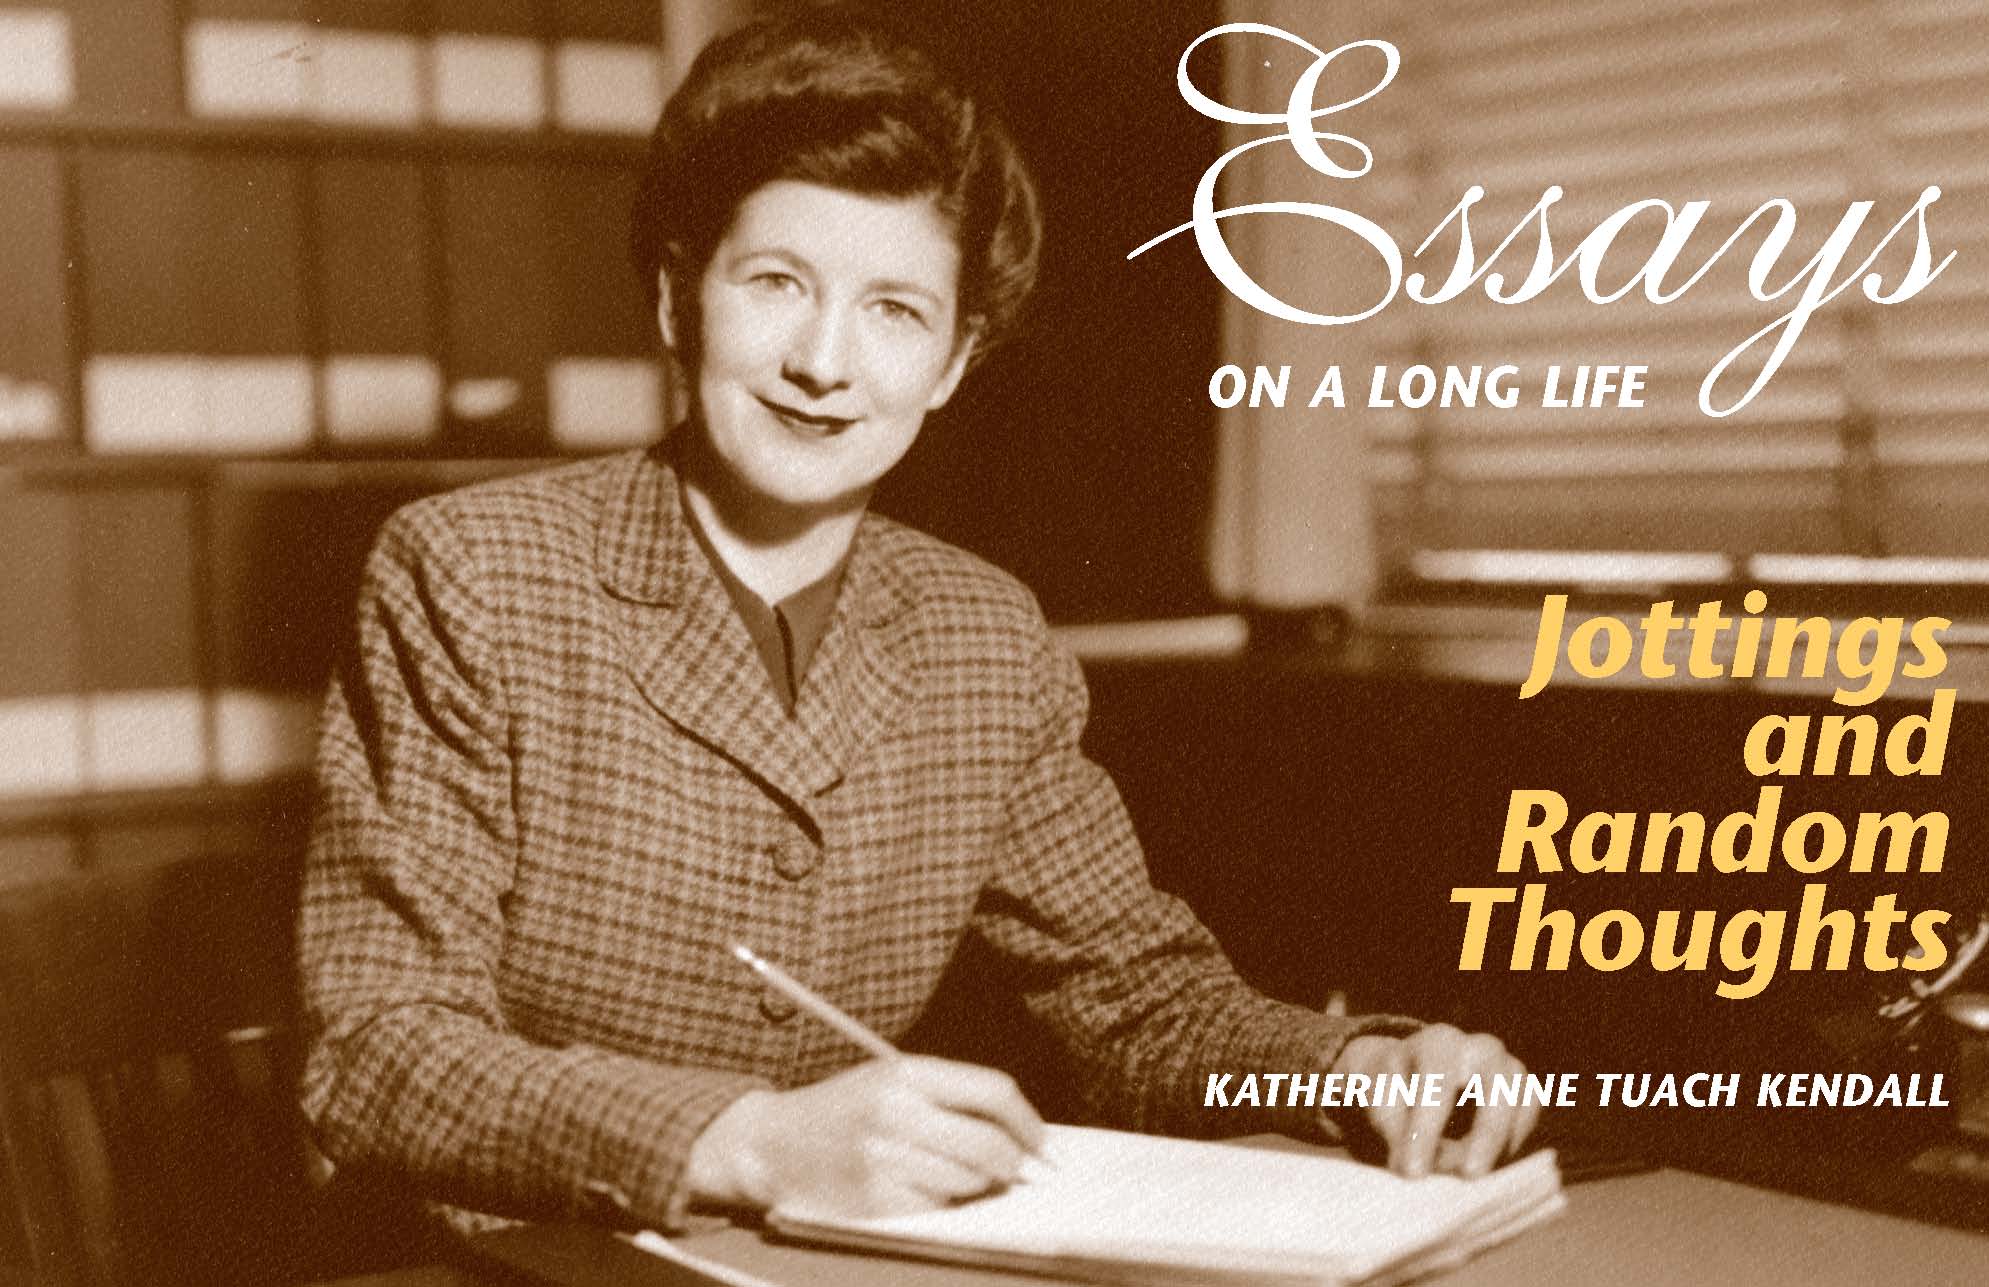 Essays on a Long Life: Jottings and Random Thoughts Book Cover